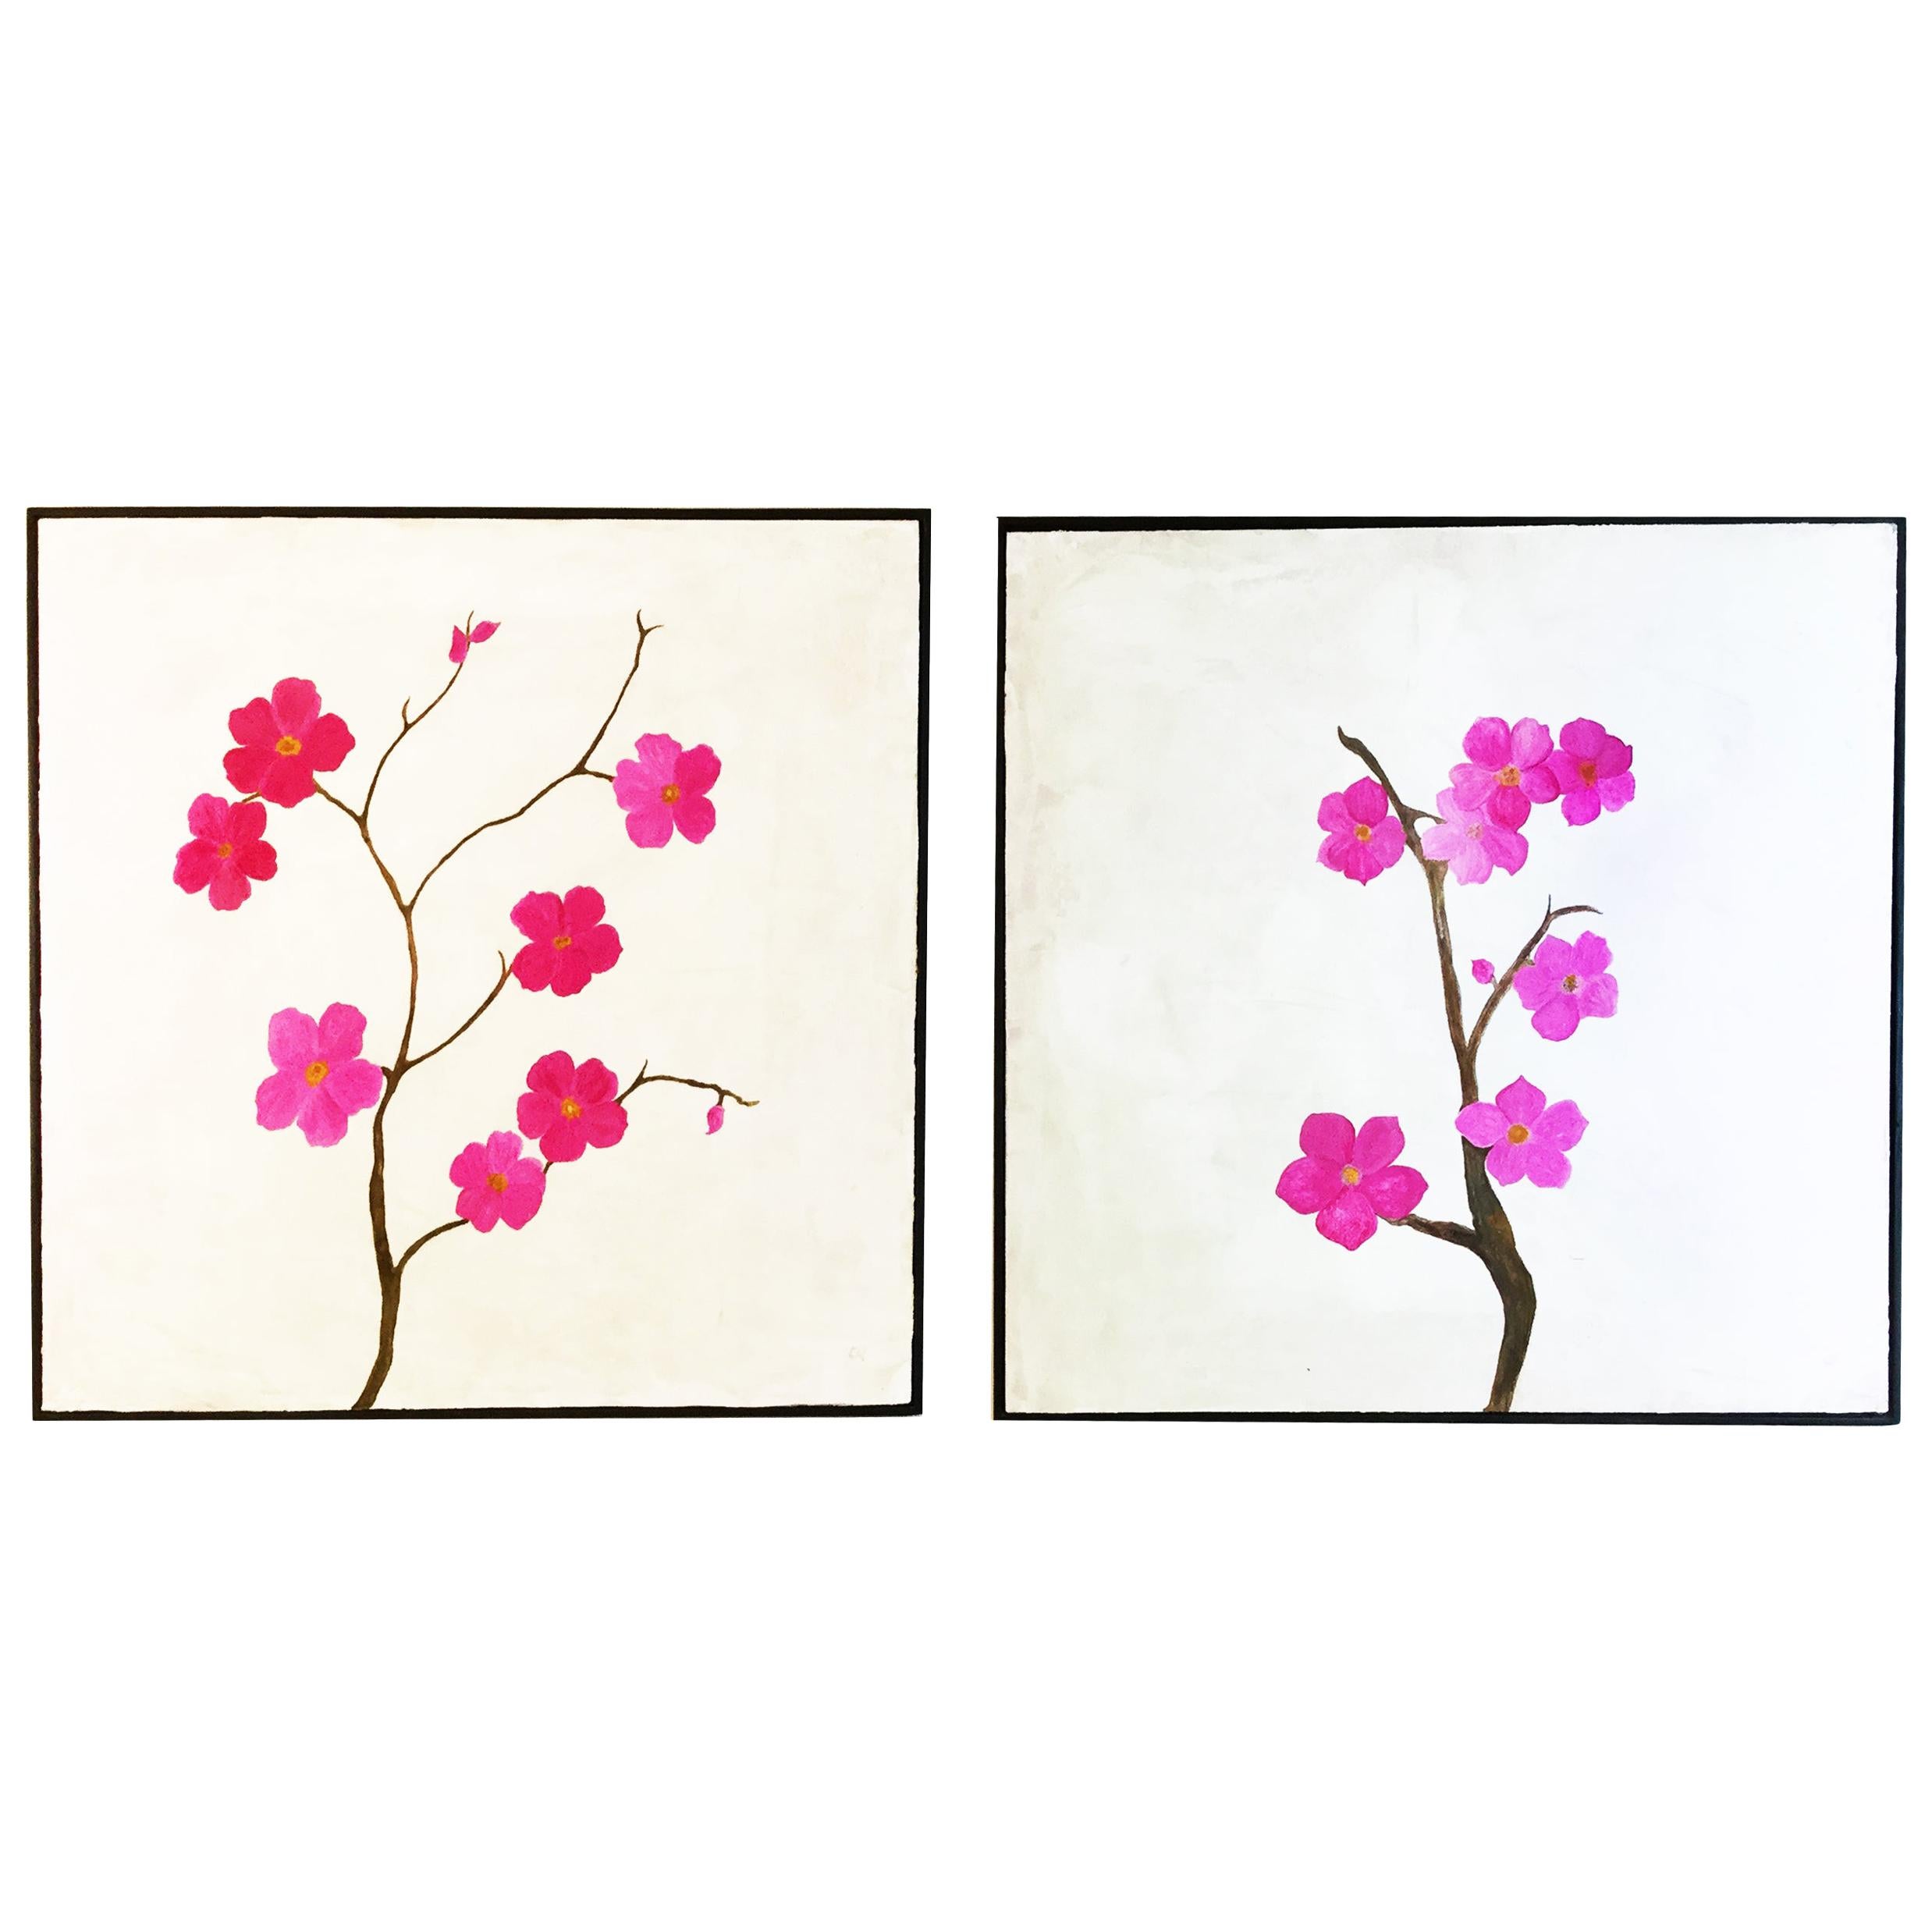 Paintings "Blossoms I & II"